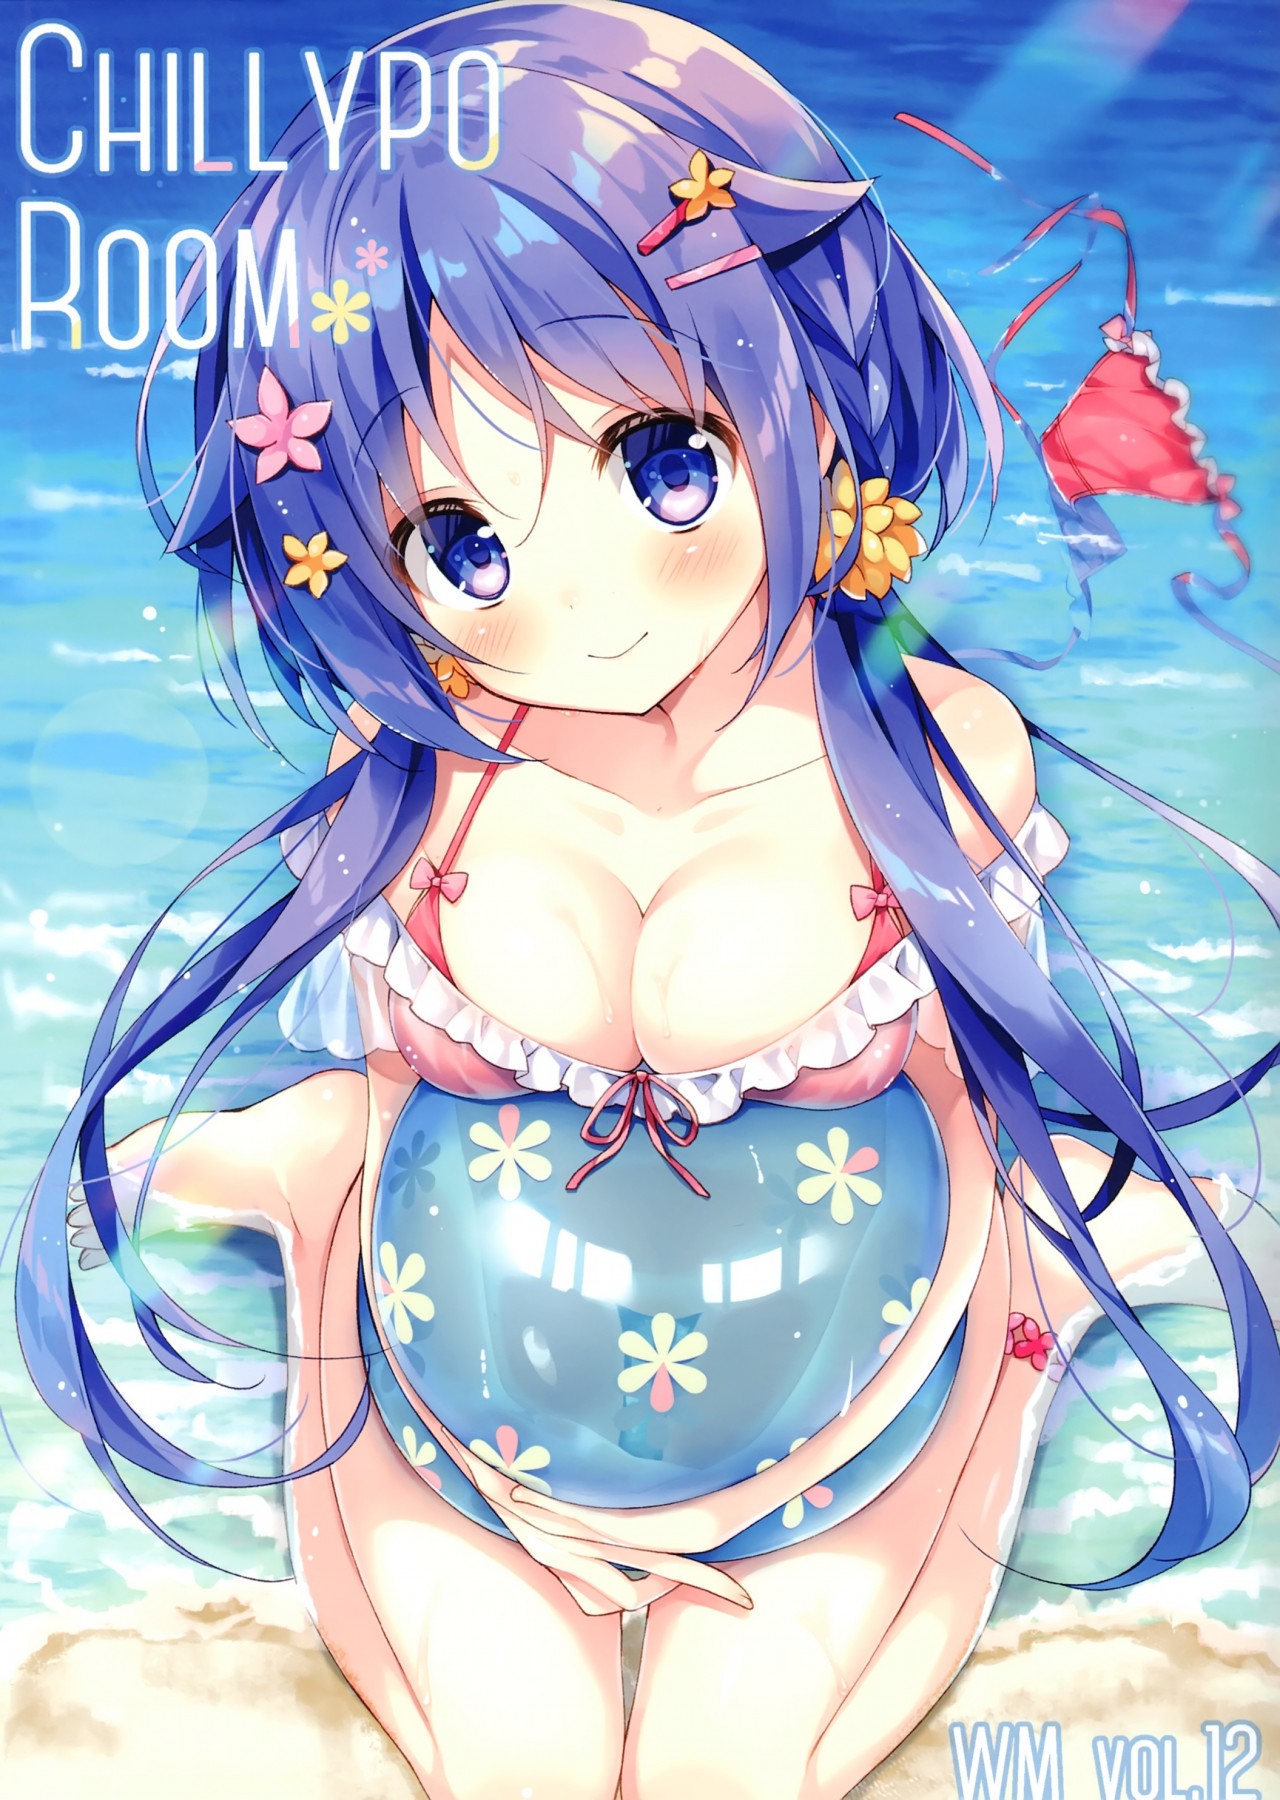 [Chilly polka (Suimya)] ChillypoRoom WMvol.12 [P1]